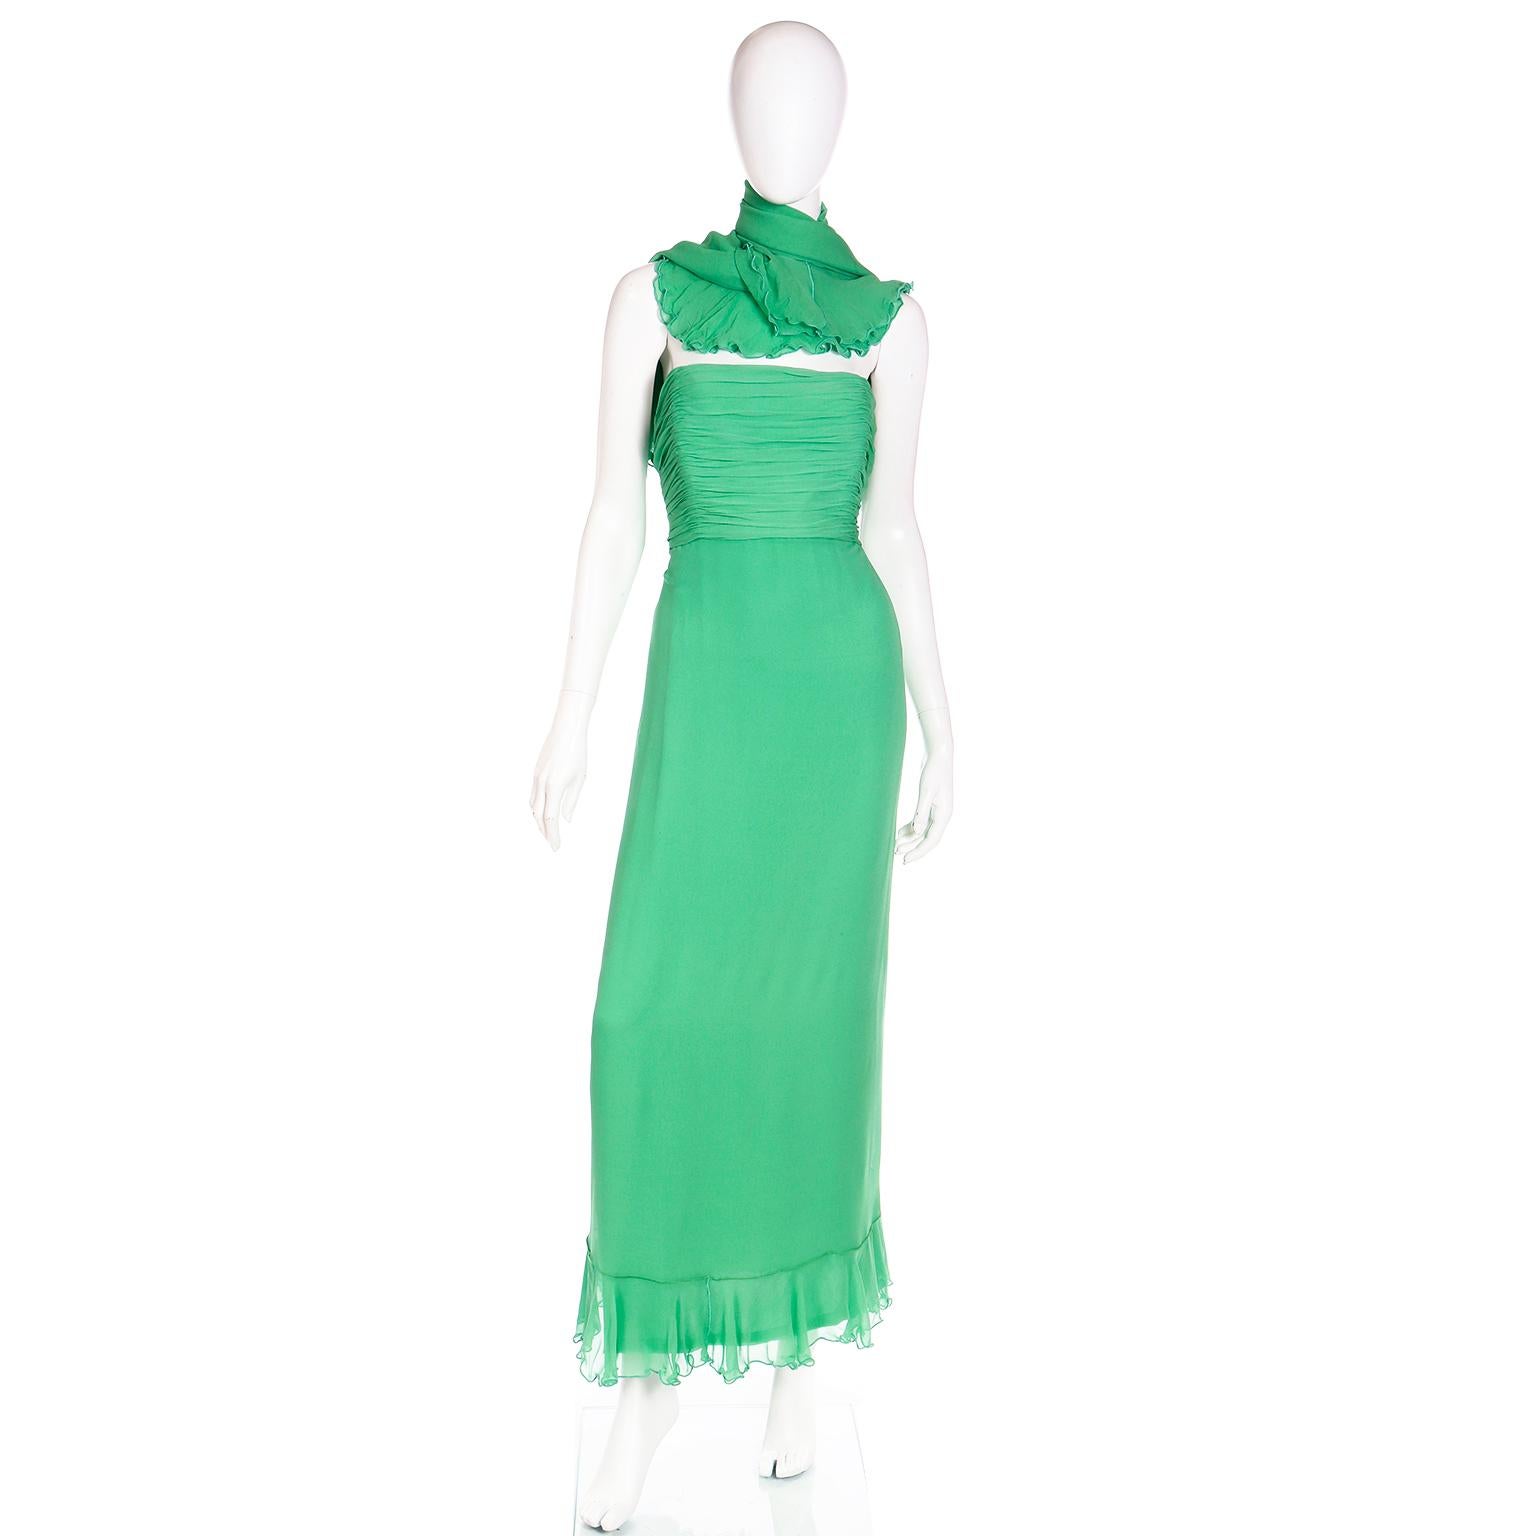 Vintage Wayne Clark Green Silk Chiffon Strapless Evening Dress With Wrap Shawl In Good Condition For Sale In Portland, OR